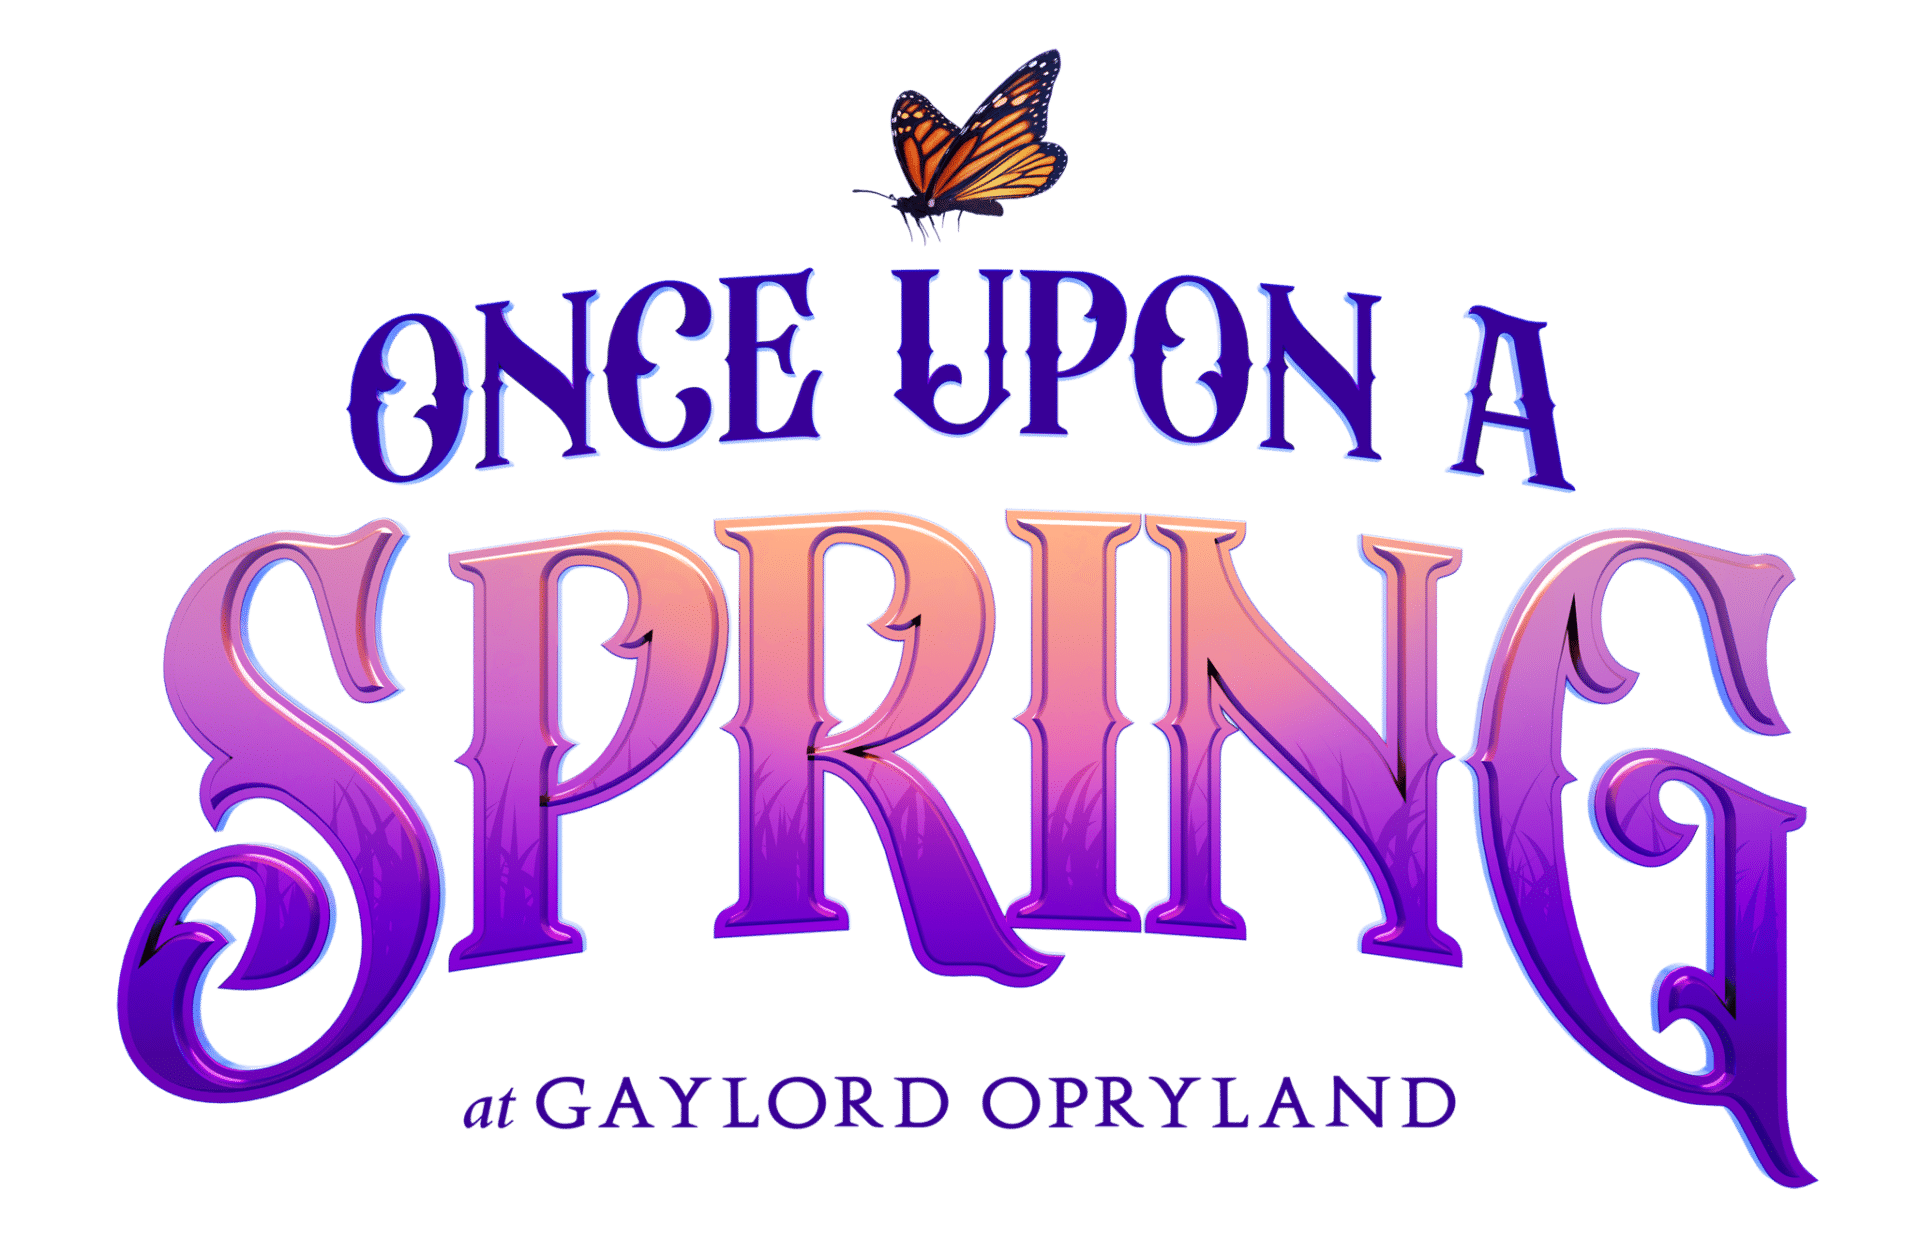 Once Upon a Spring offers family activities in Nashville, Tennessee at Gaylord Opryland Resort, spring-themed boat rides, sweet treats to decorate (and eat!), an Easter Bunny meet & greet, and other crafty, educational, and all-around exciting activities for the entire family.